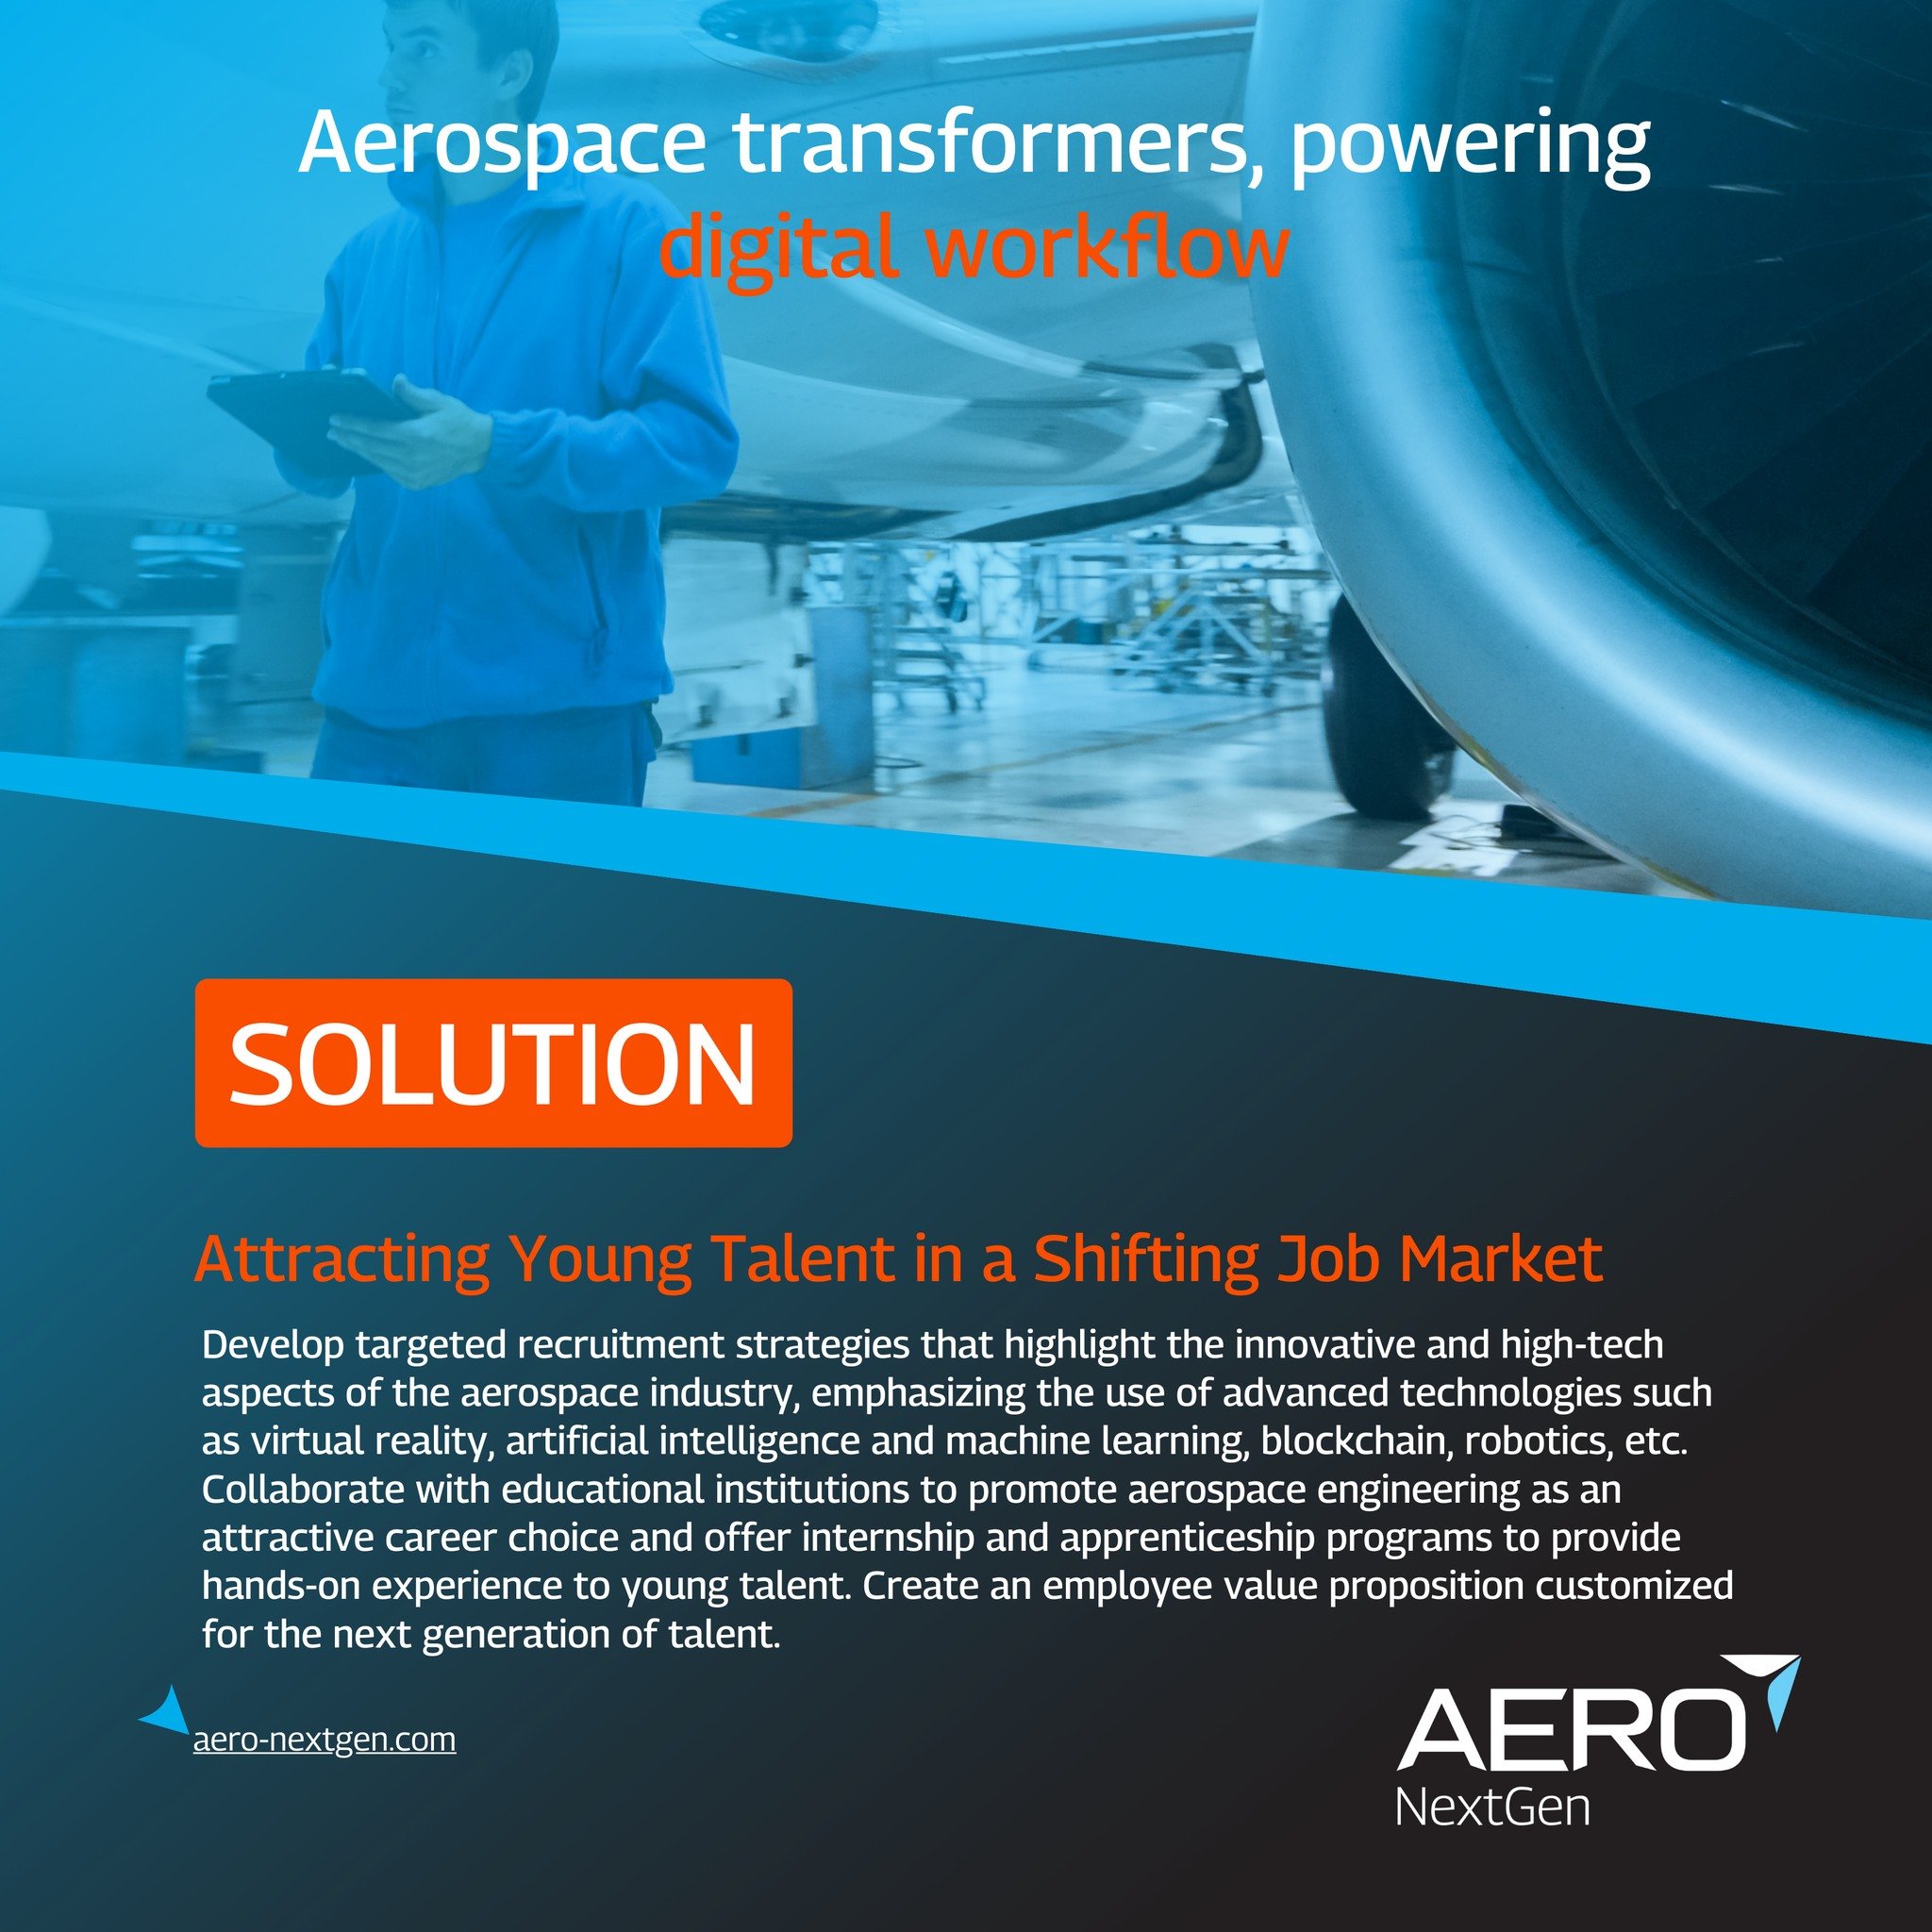 SOLUTION EXPOSED | Going Paperless to Streamline MRO Operations 🚀✨

Introduces a transformative solution to the administrative burden and complex documentation challenges faced by MRO technicians. 
The key? Paperless applications designed to revolut